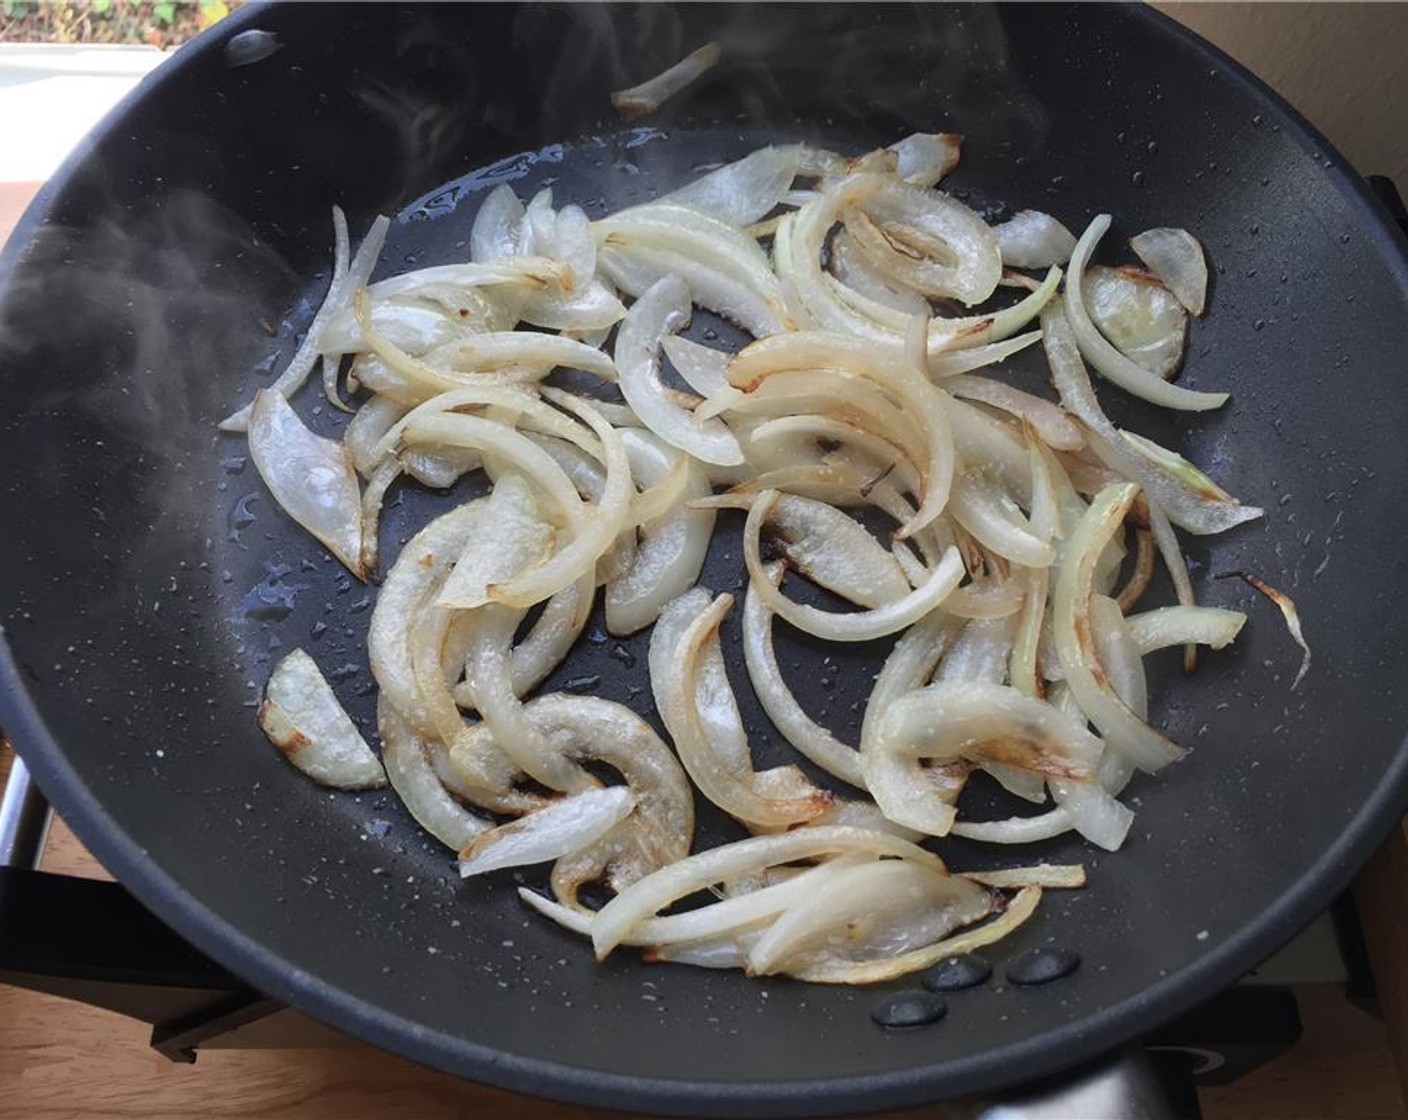 step 4 To a saute pan over medium-high heat, add the Olive Oil (1 tsp) and once shimmering, add the sliced onion. Toss a few times for 4 to 5 minutes to get some color on them. If the pan seems too hot, lower to medium.